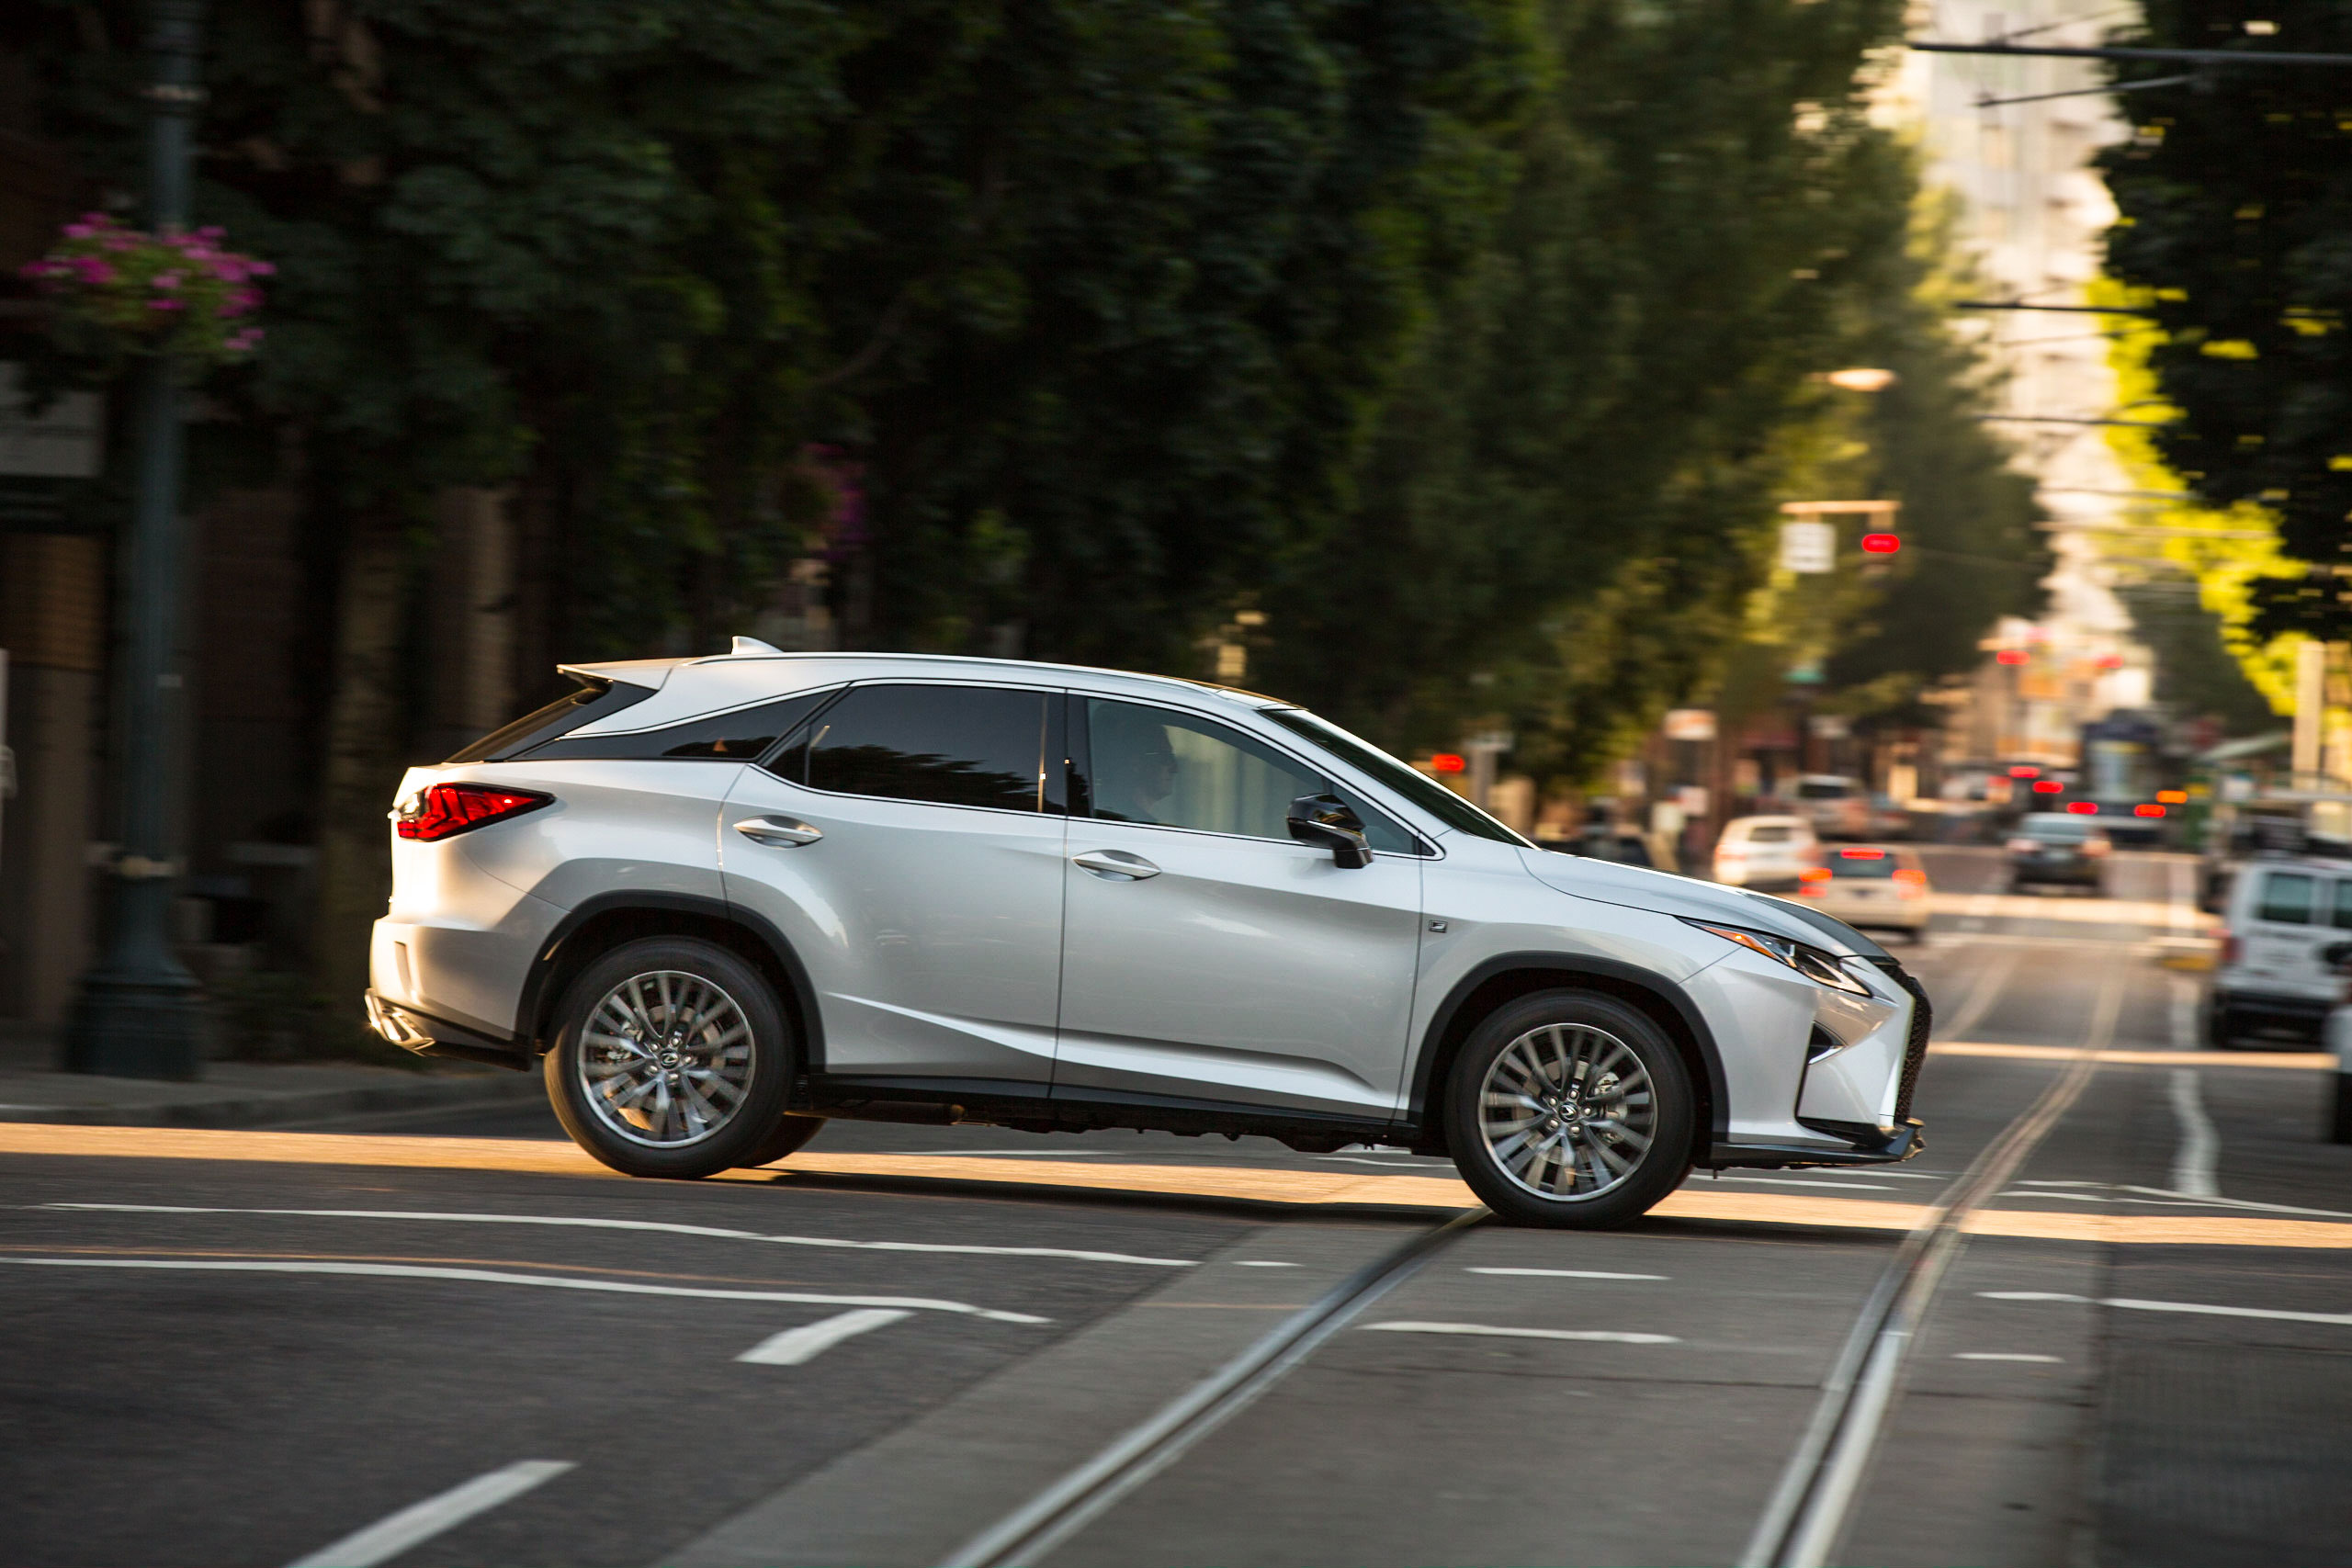 Official Gallery: 120 Photos of the 2016 Lexus RX | Lexus Enthusiast